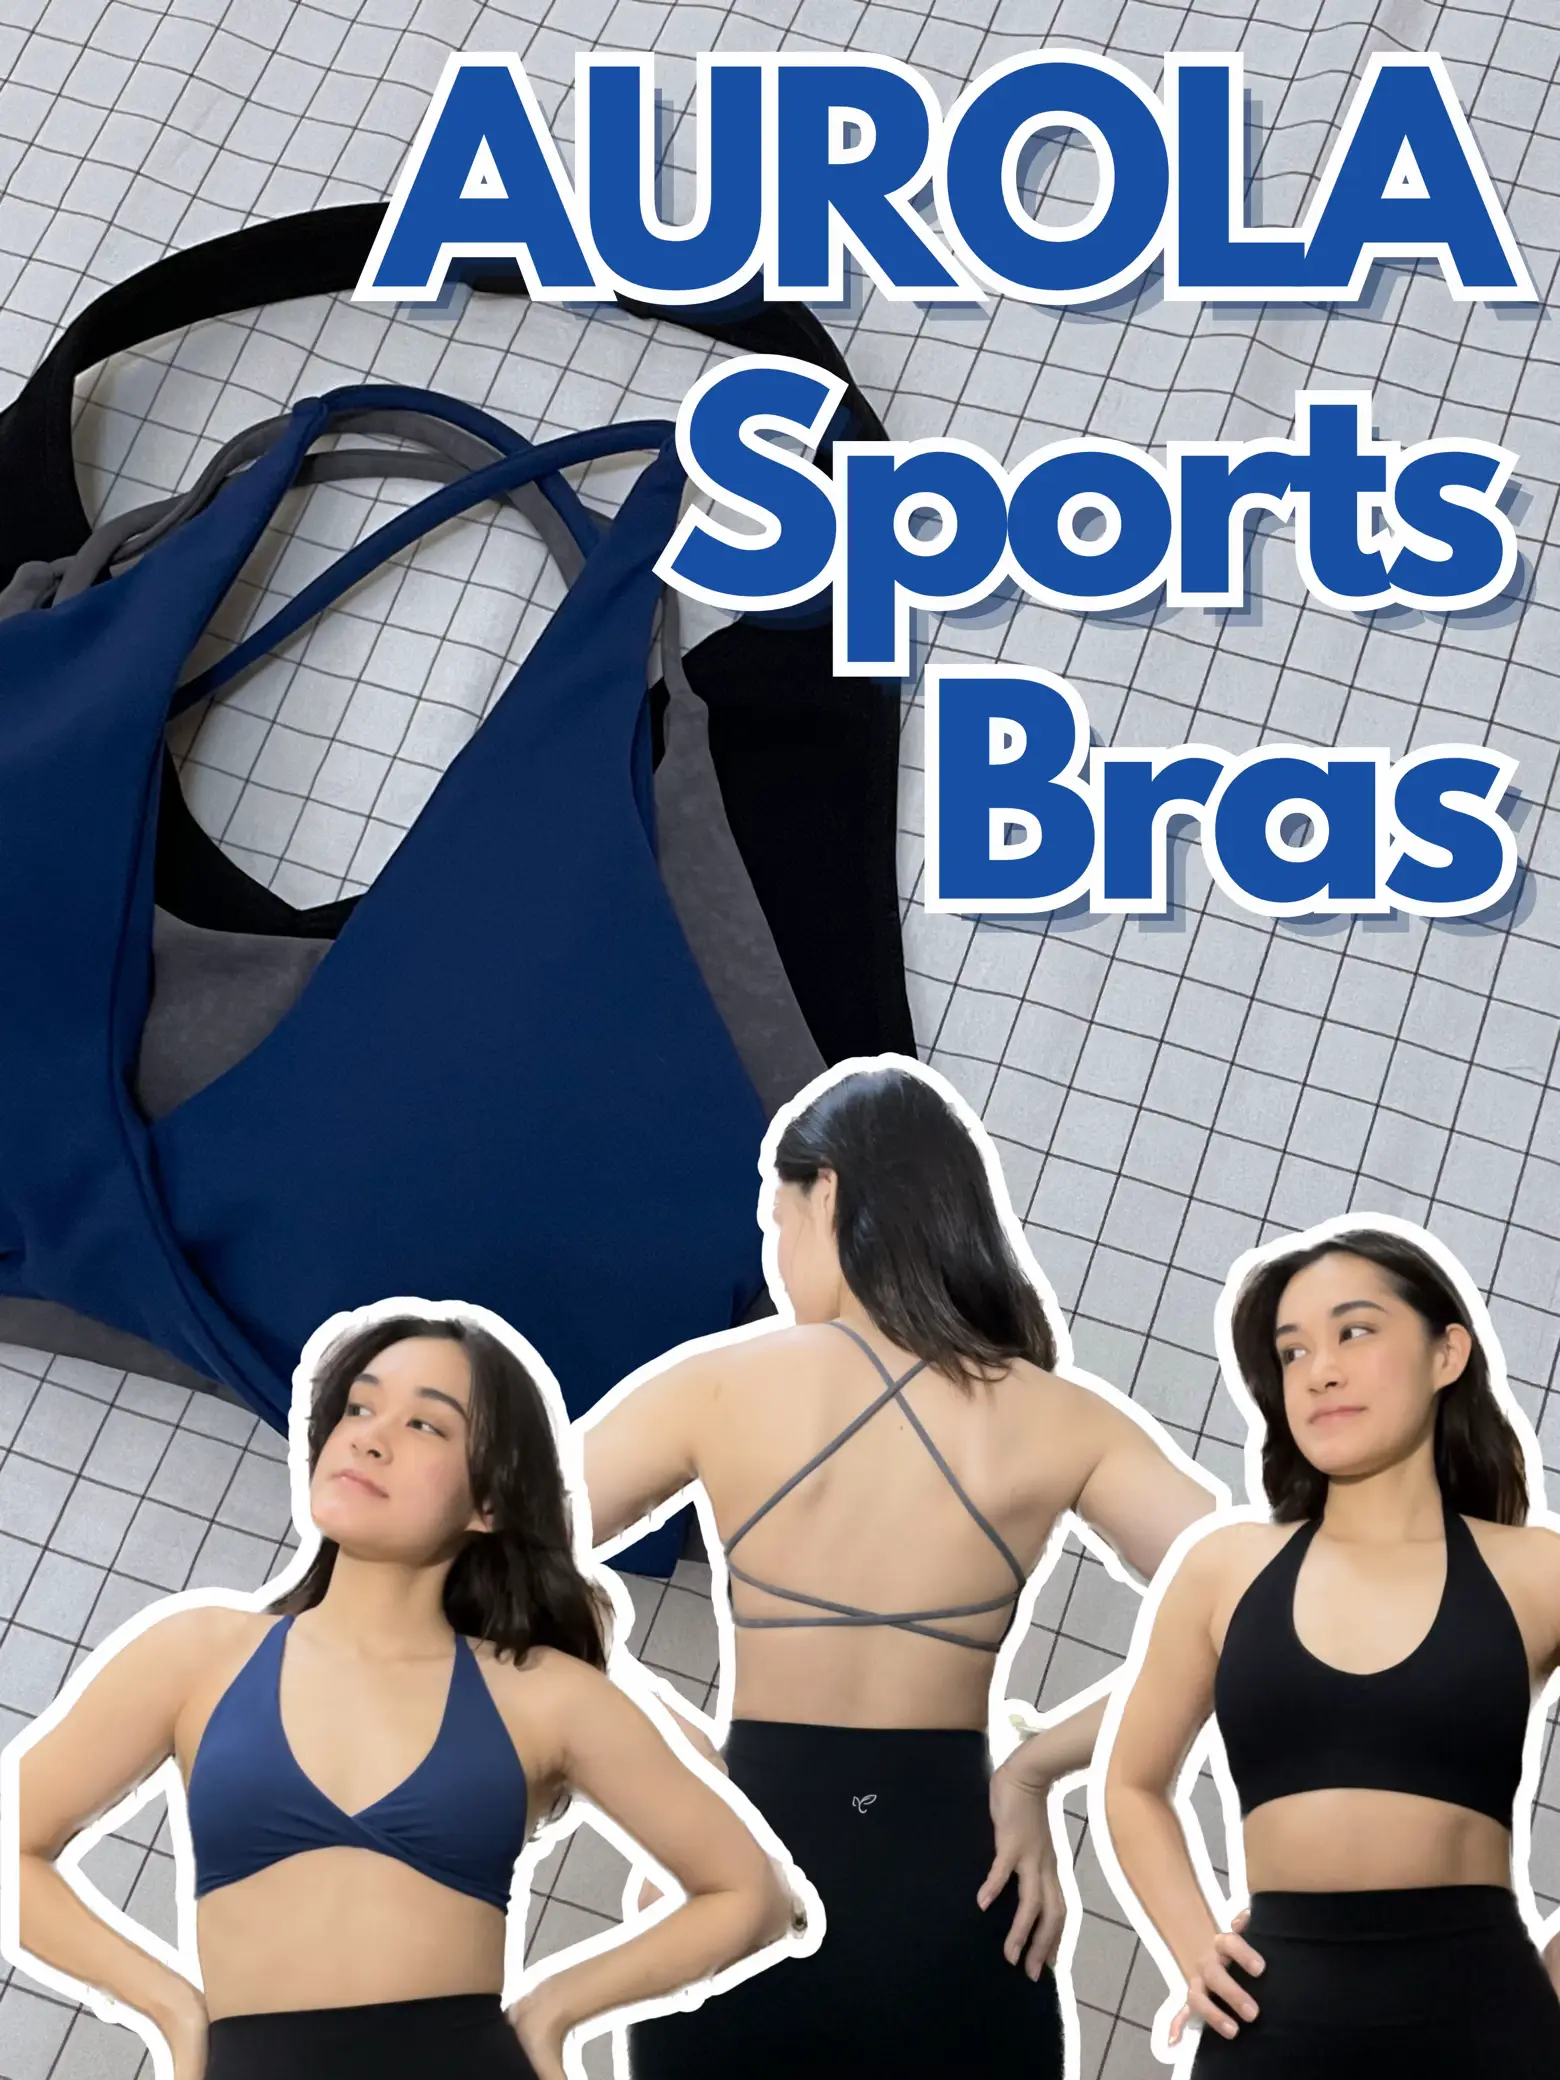 Shop gymshark sports bra for Sale on Shopee Philippines